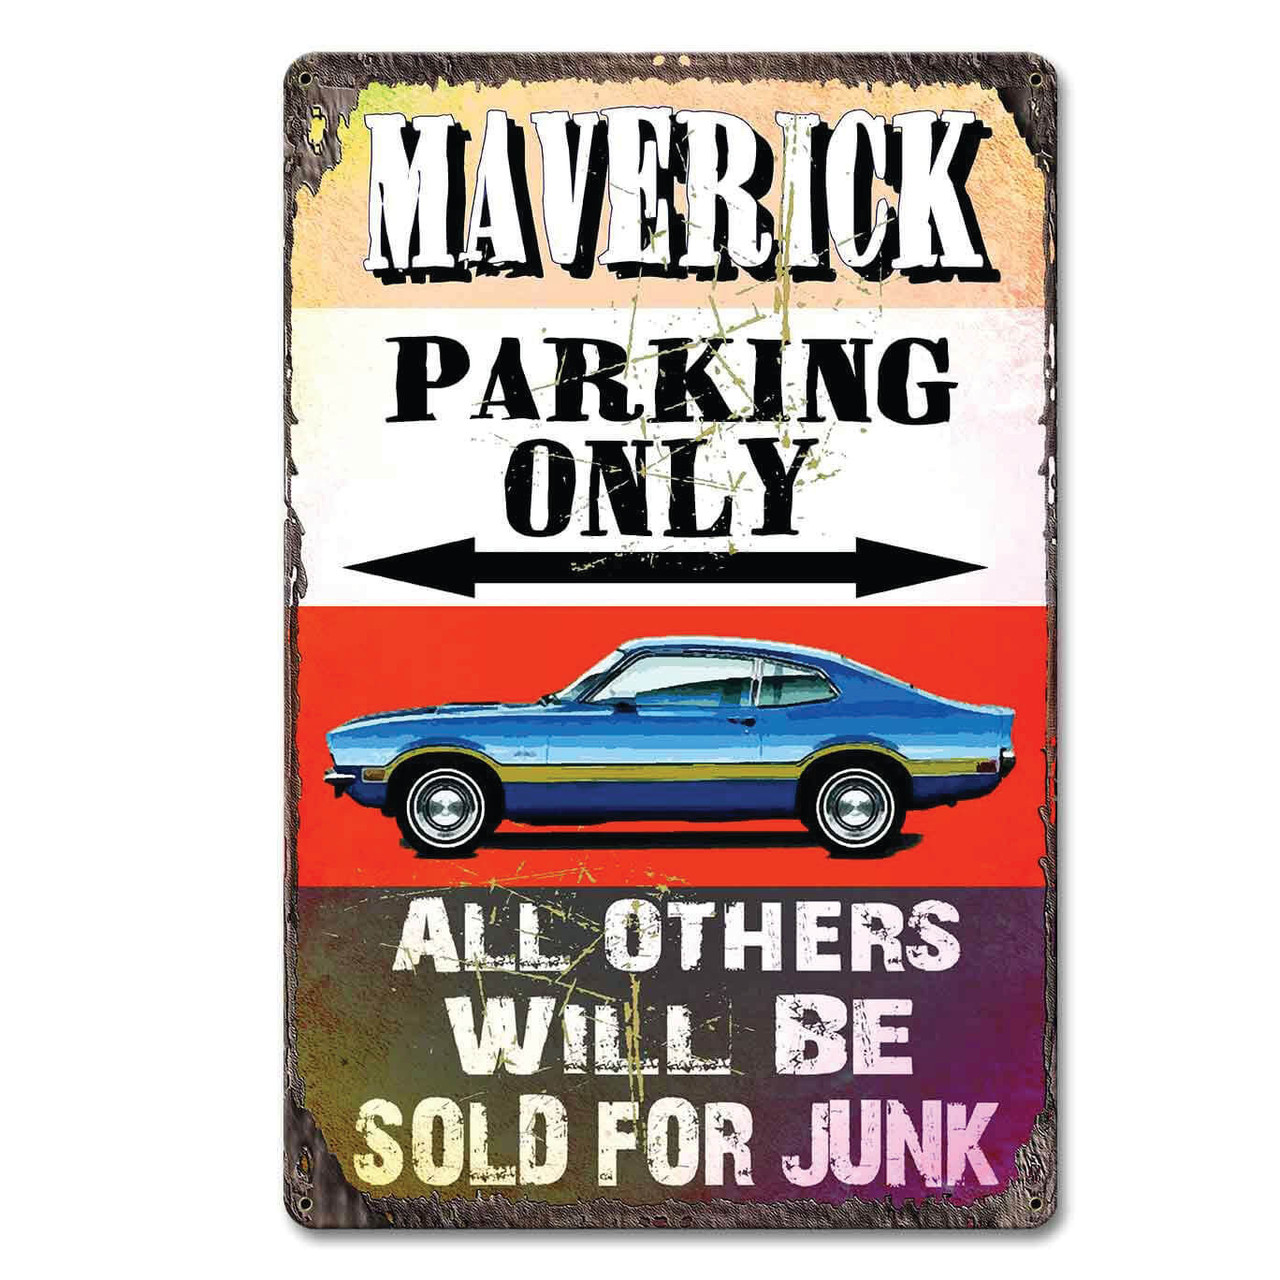 Maverick Parking Only Metal Sign 12 x 18 Inches